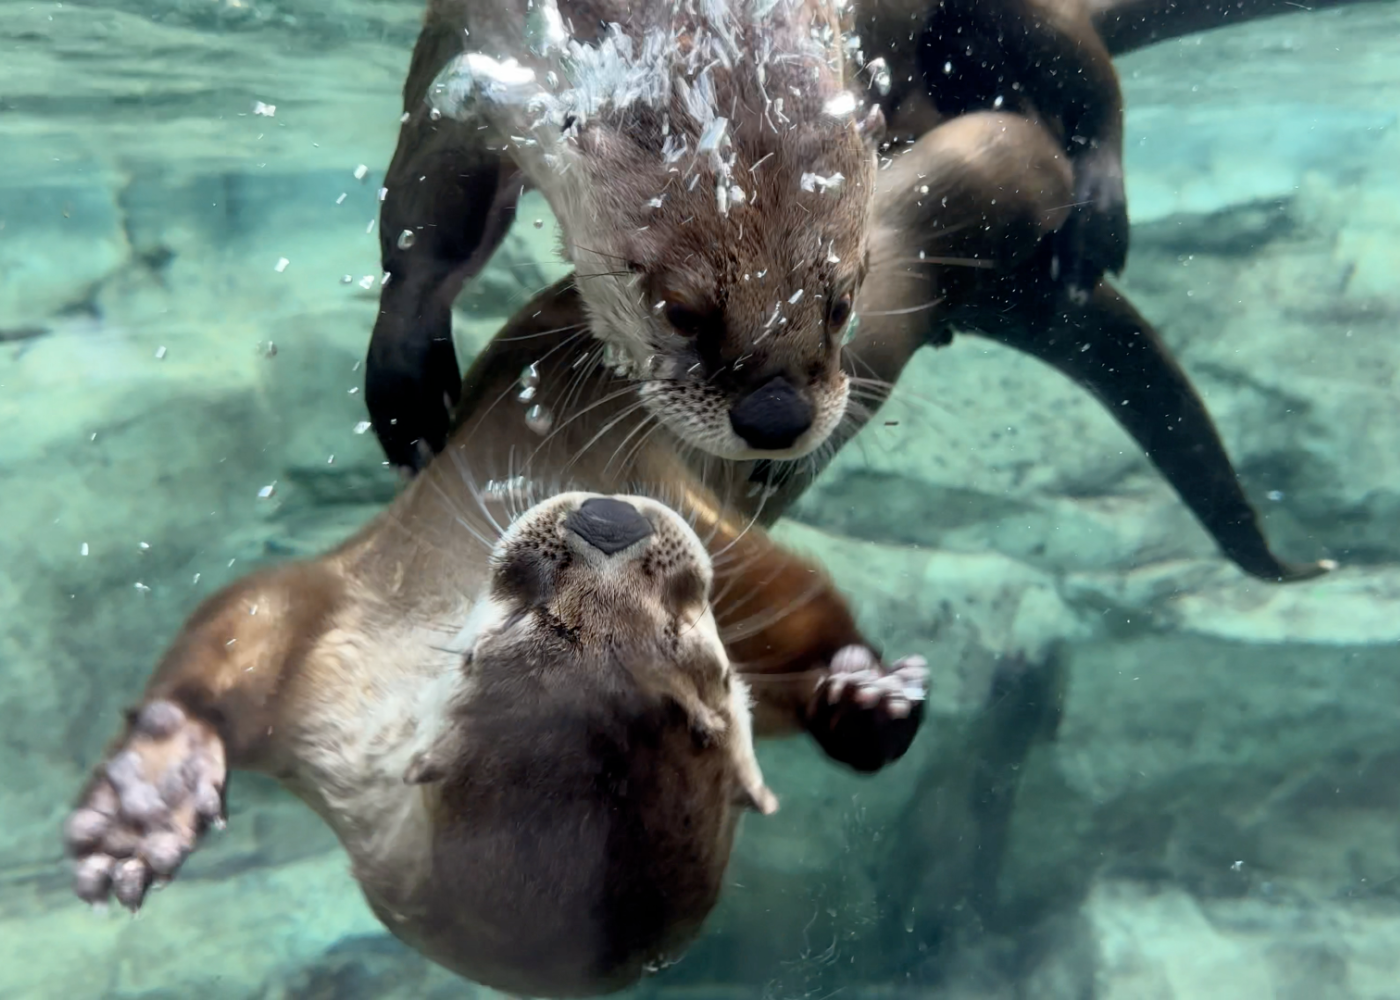 two river otters play in water, one upside-down facing the other